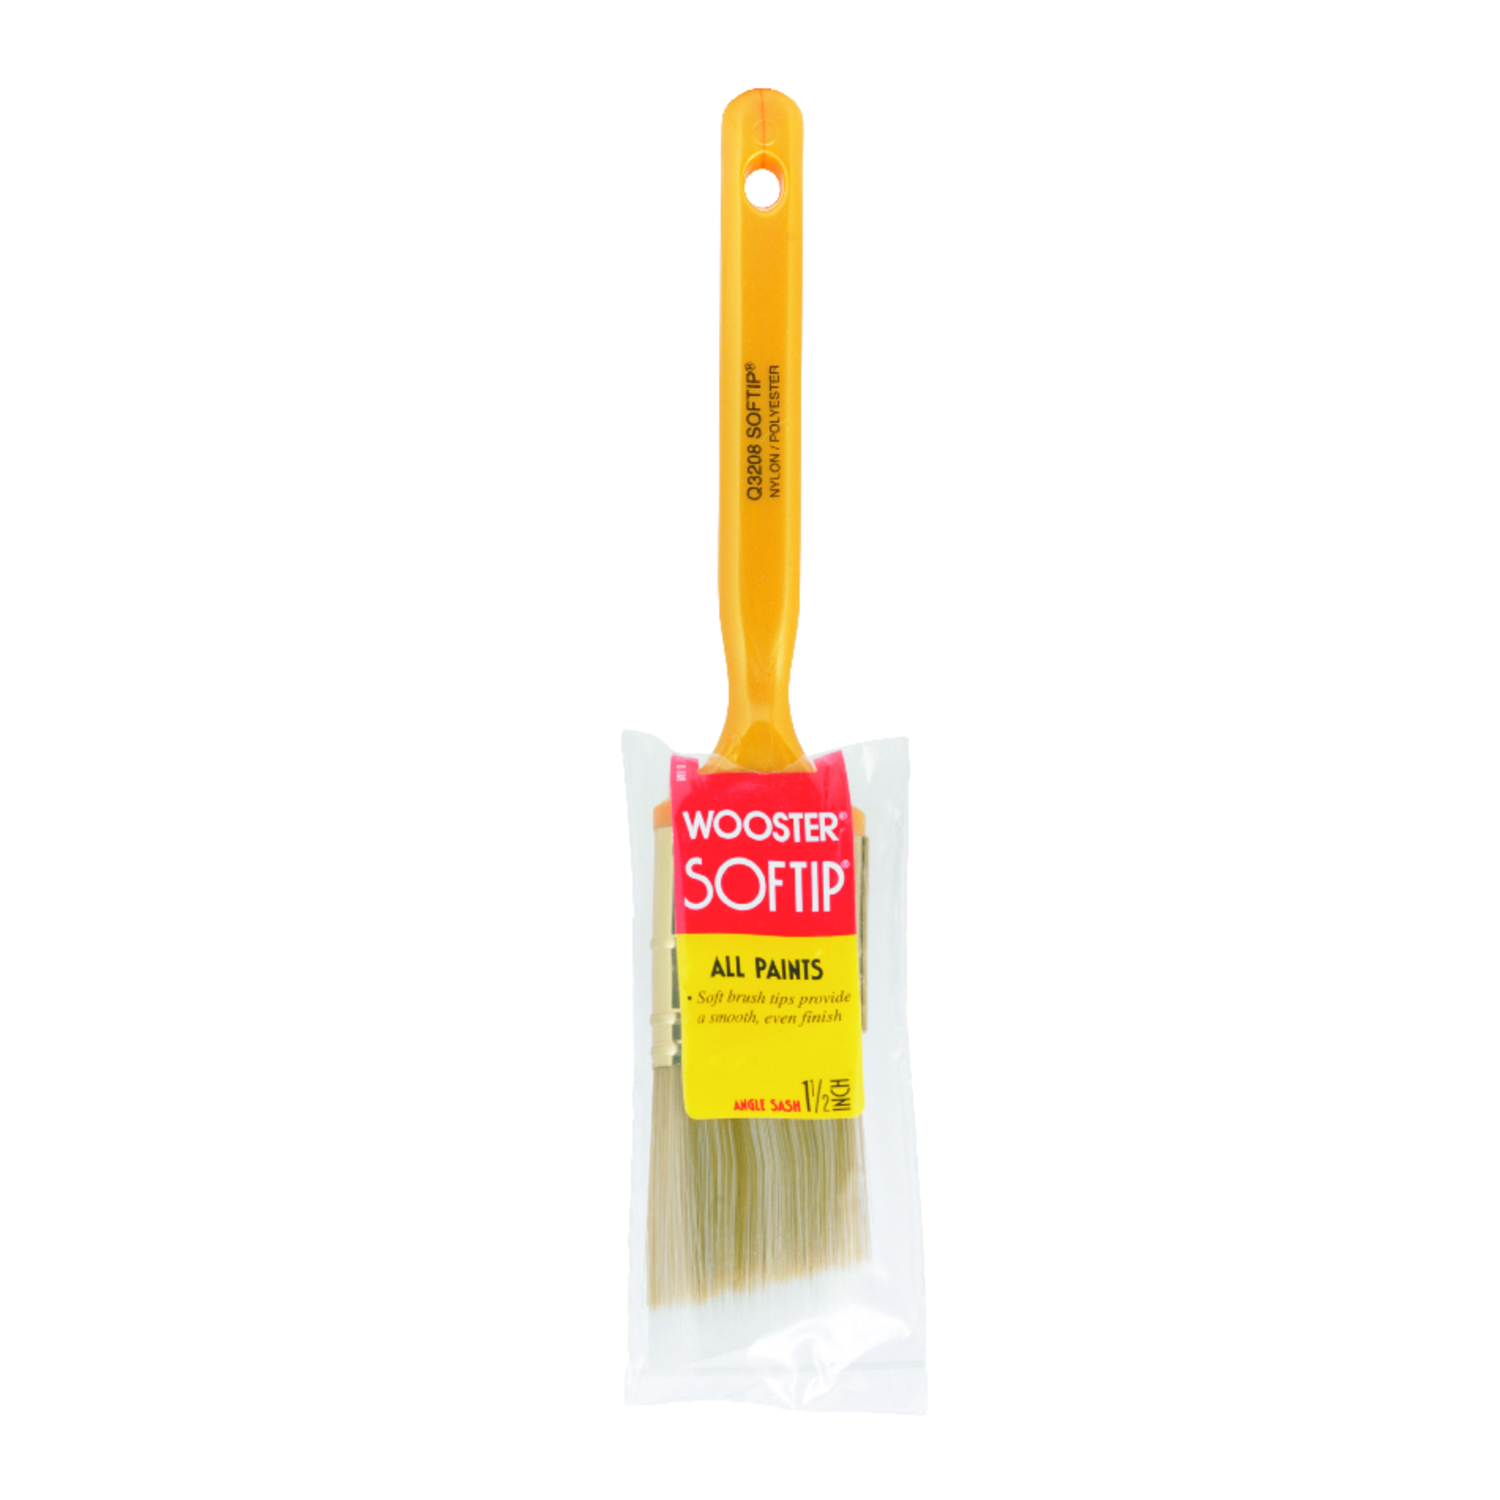 Photos - Putty Knife / Painting Tool Wooster Softip 1-1/2 in. Angle Trim Paint Brush Q3208-11/2